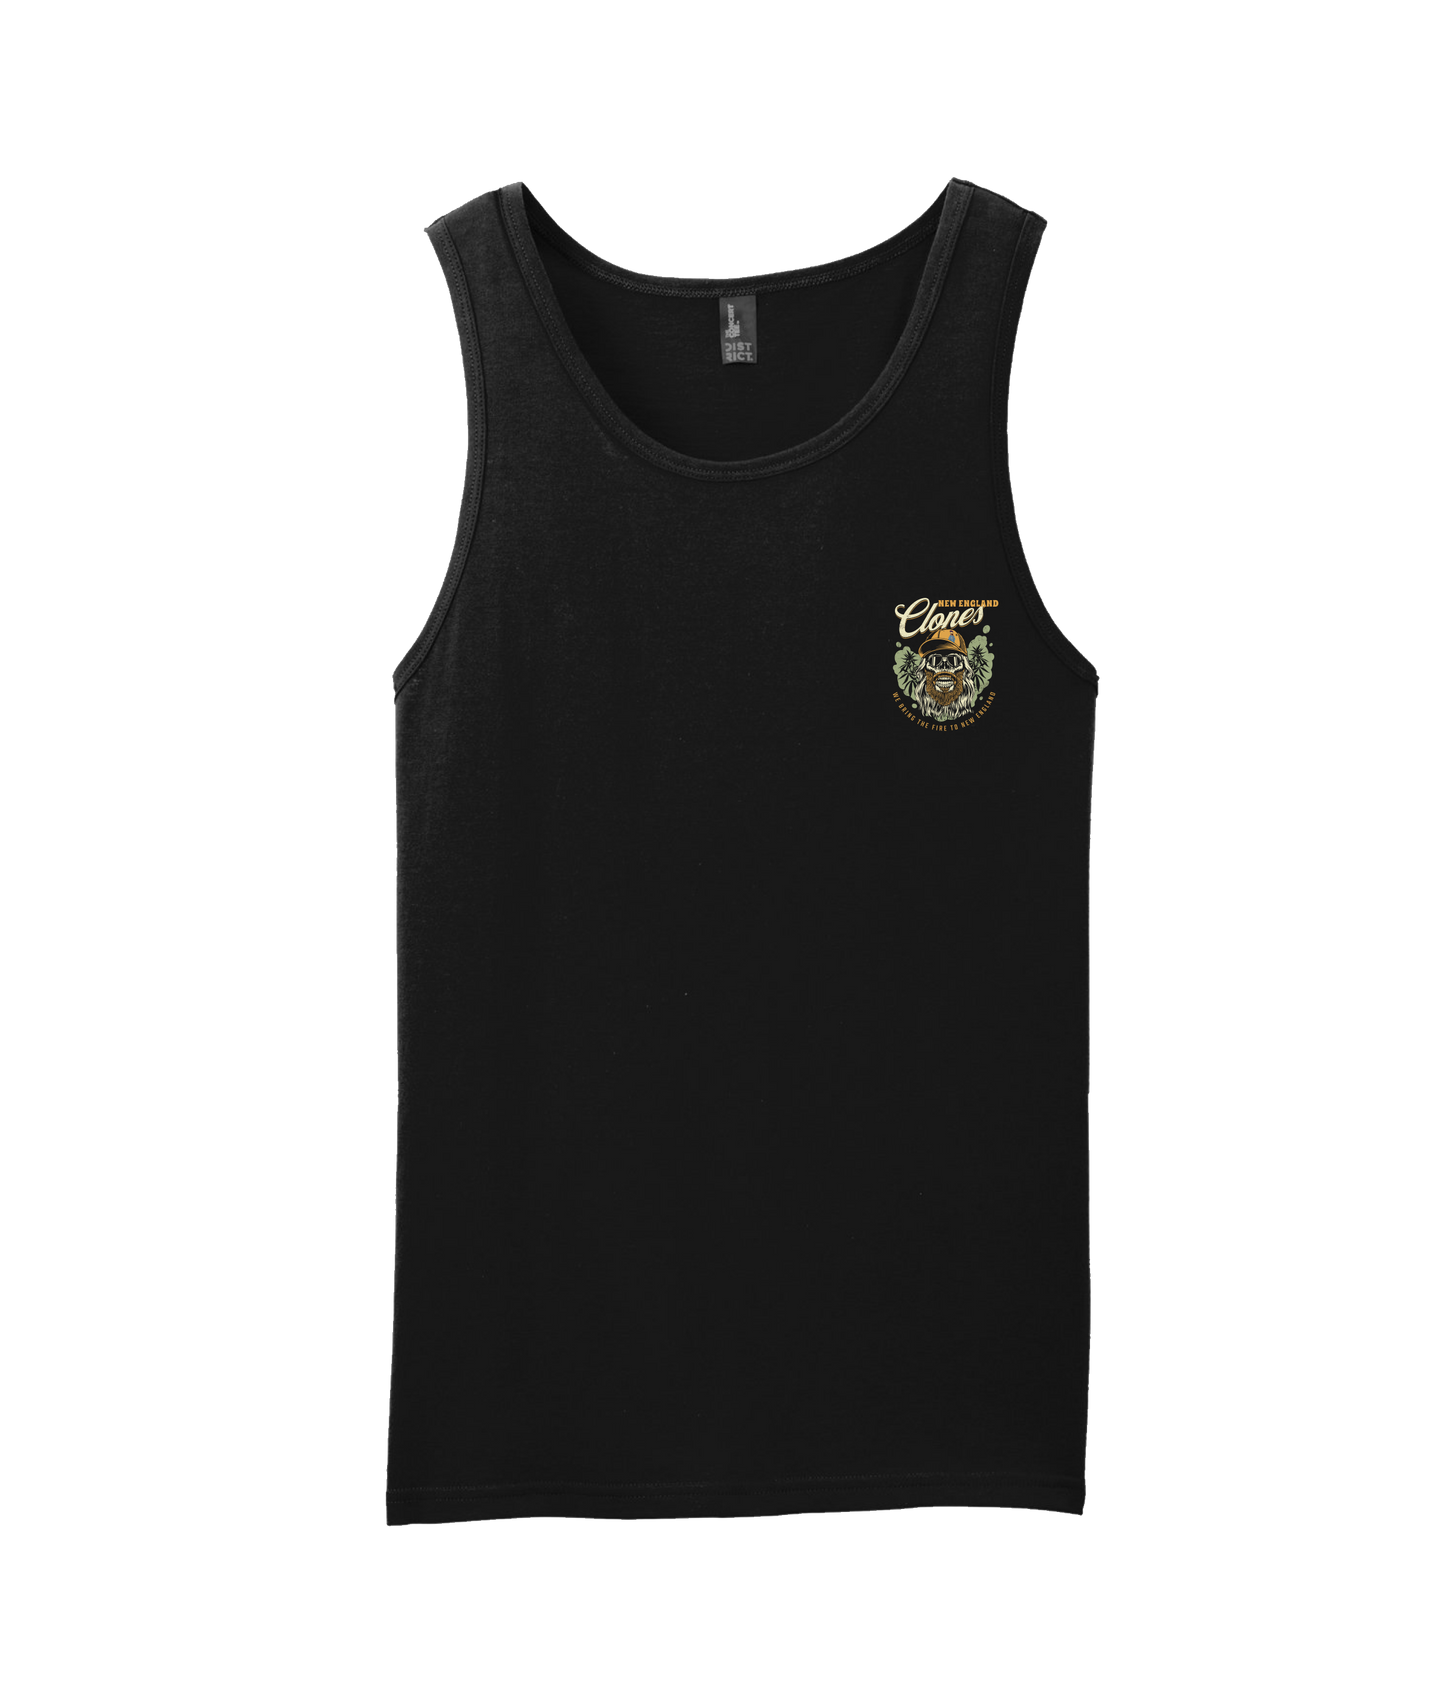 New England Clones - WE BRING THE FIRE - Black Tank Top